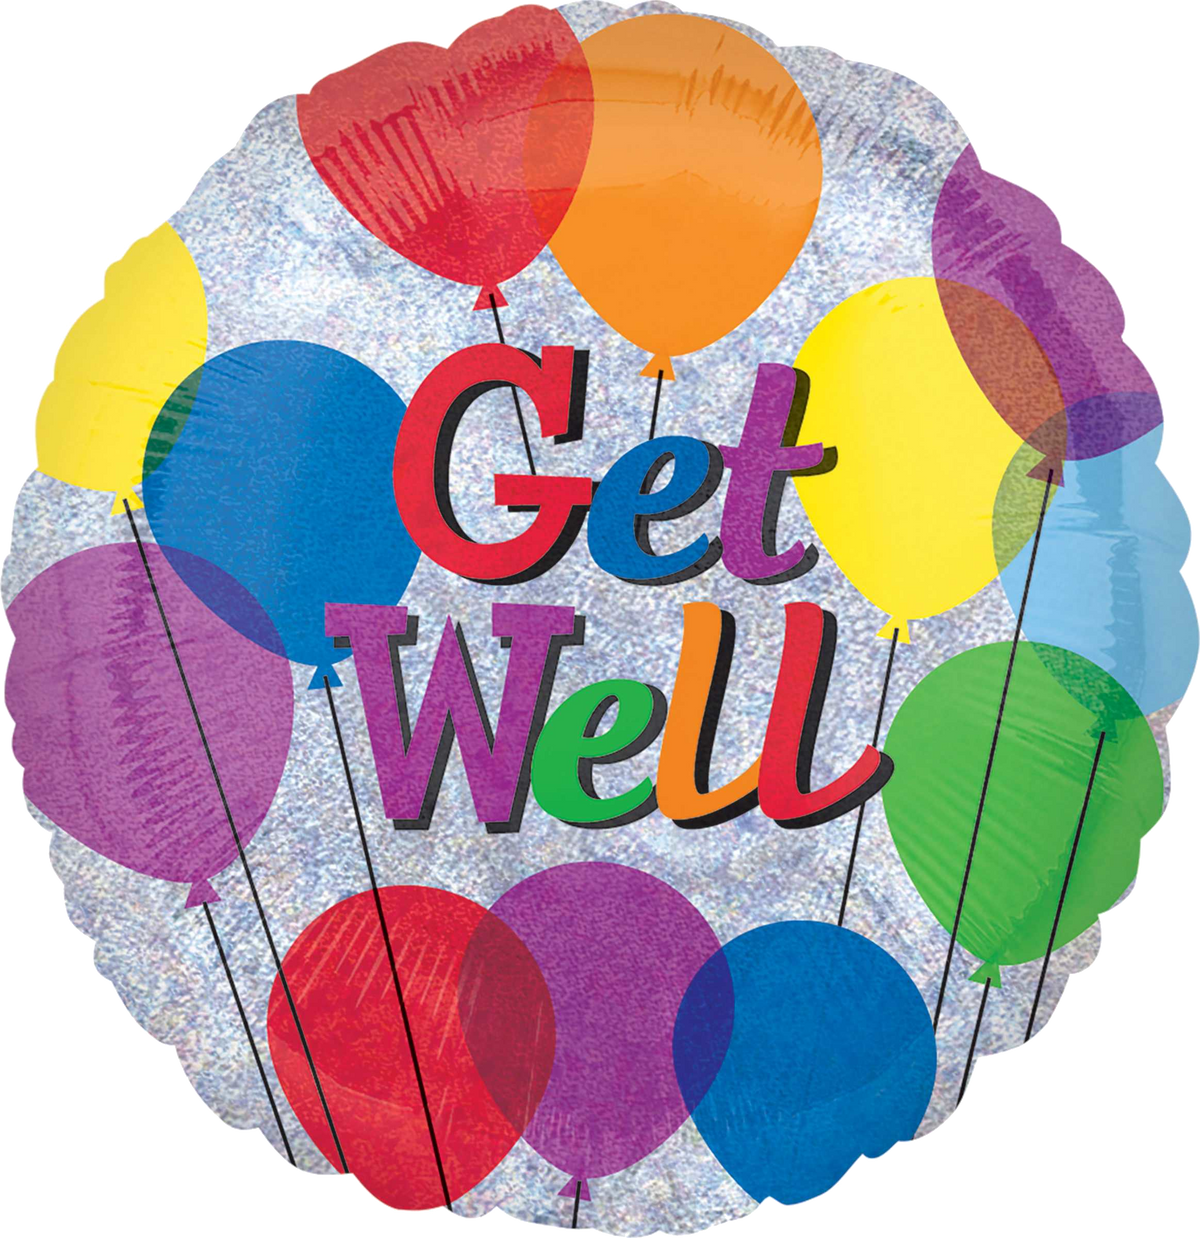 Get Well Holographic Balloon Bouquet